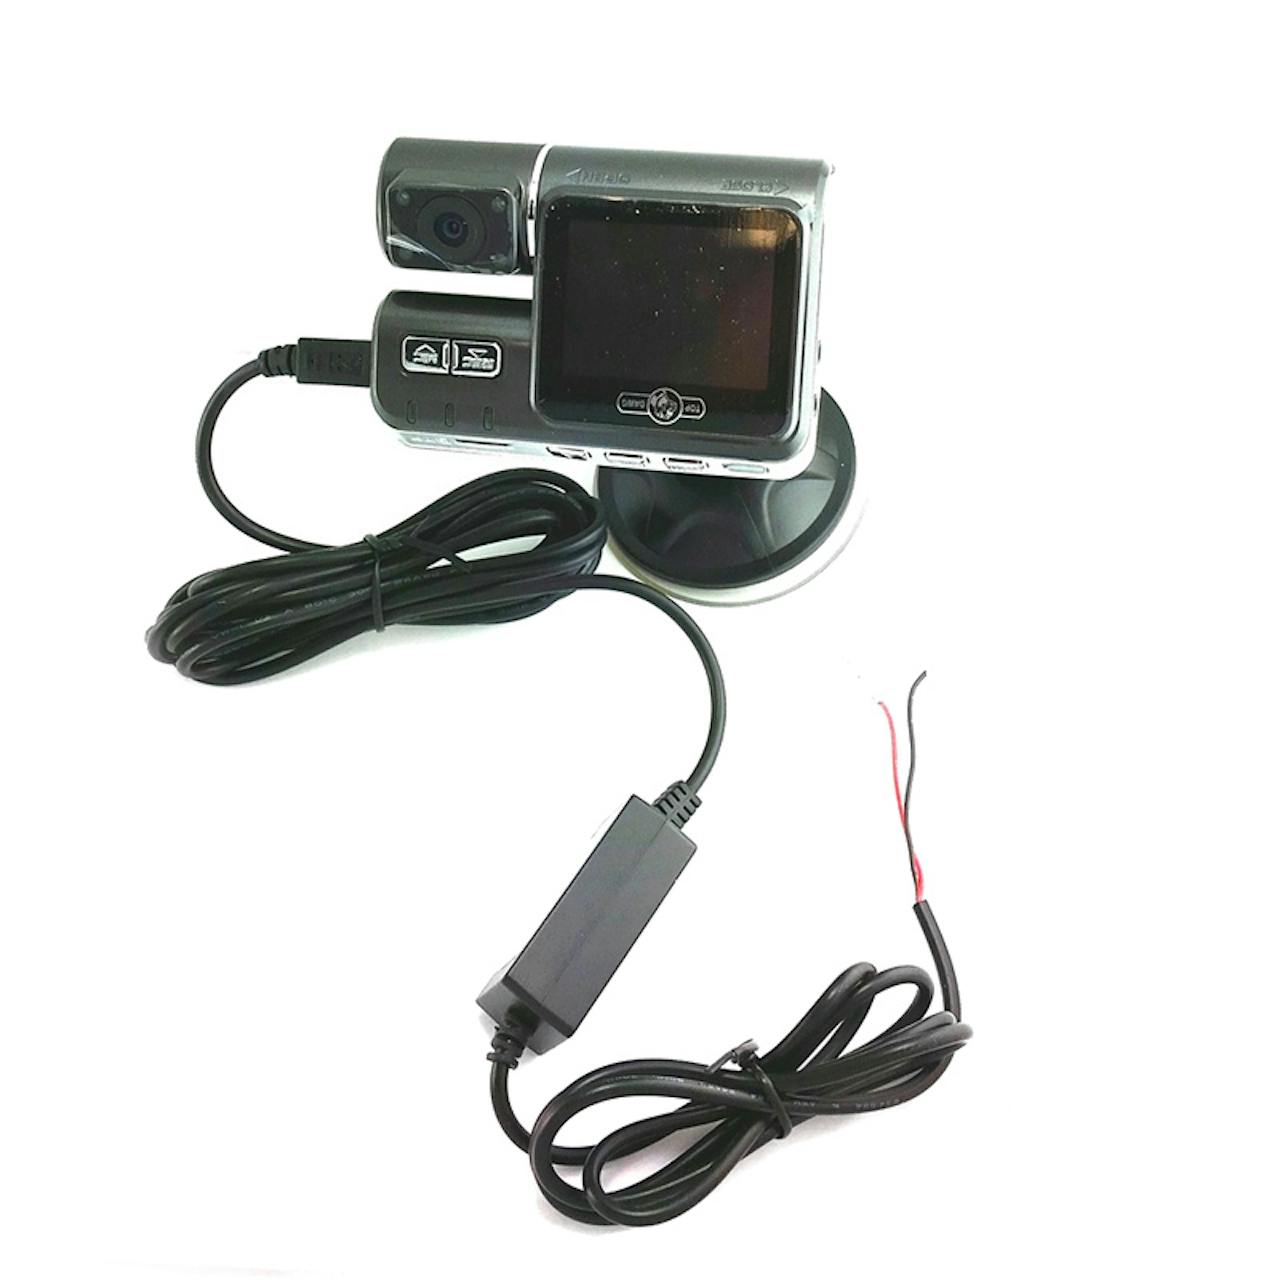 https://raneys-cdn11.imgix.net/images/stencil/original/products/196344/108347/12-Volt-Hard-Wire-Power-Cable-For-Dash-Cams-Connected-TDDVRCAM12VC__54018.1491407903.jpg?auto=compress,format&w=1280